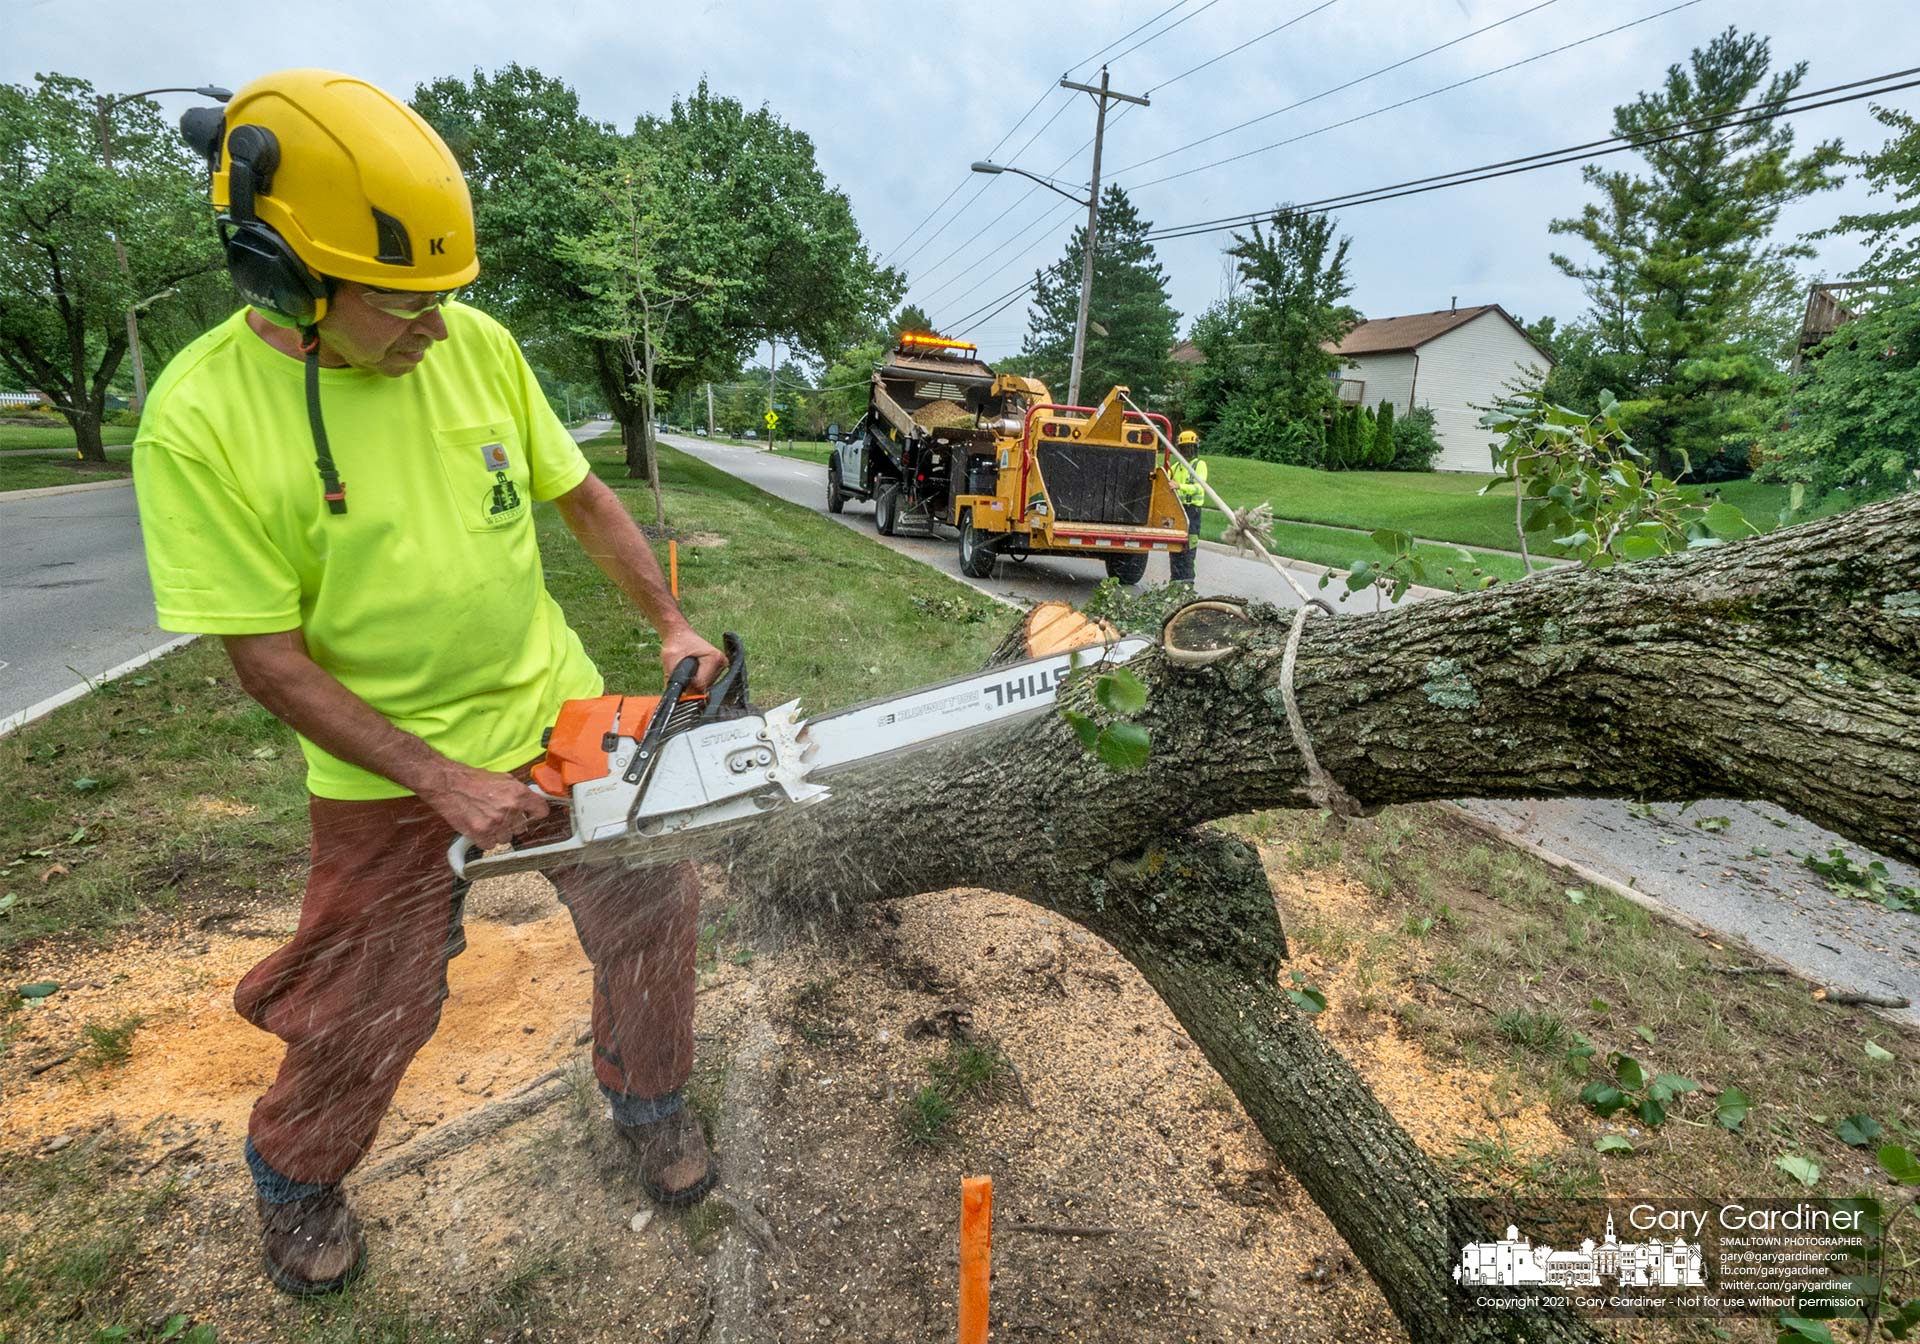 A crew removes some trees and trim others as the city prepares to install new streetlights in the median of Huber Village Blvd. My Final Photo for Aug. 19, 2021.